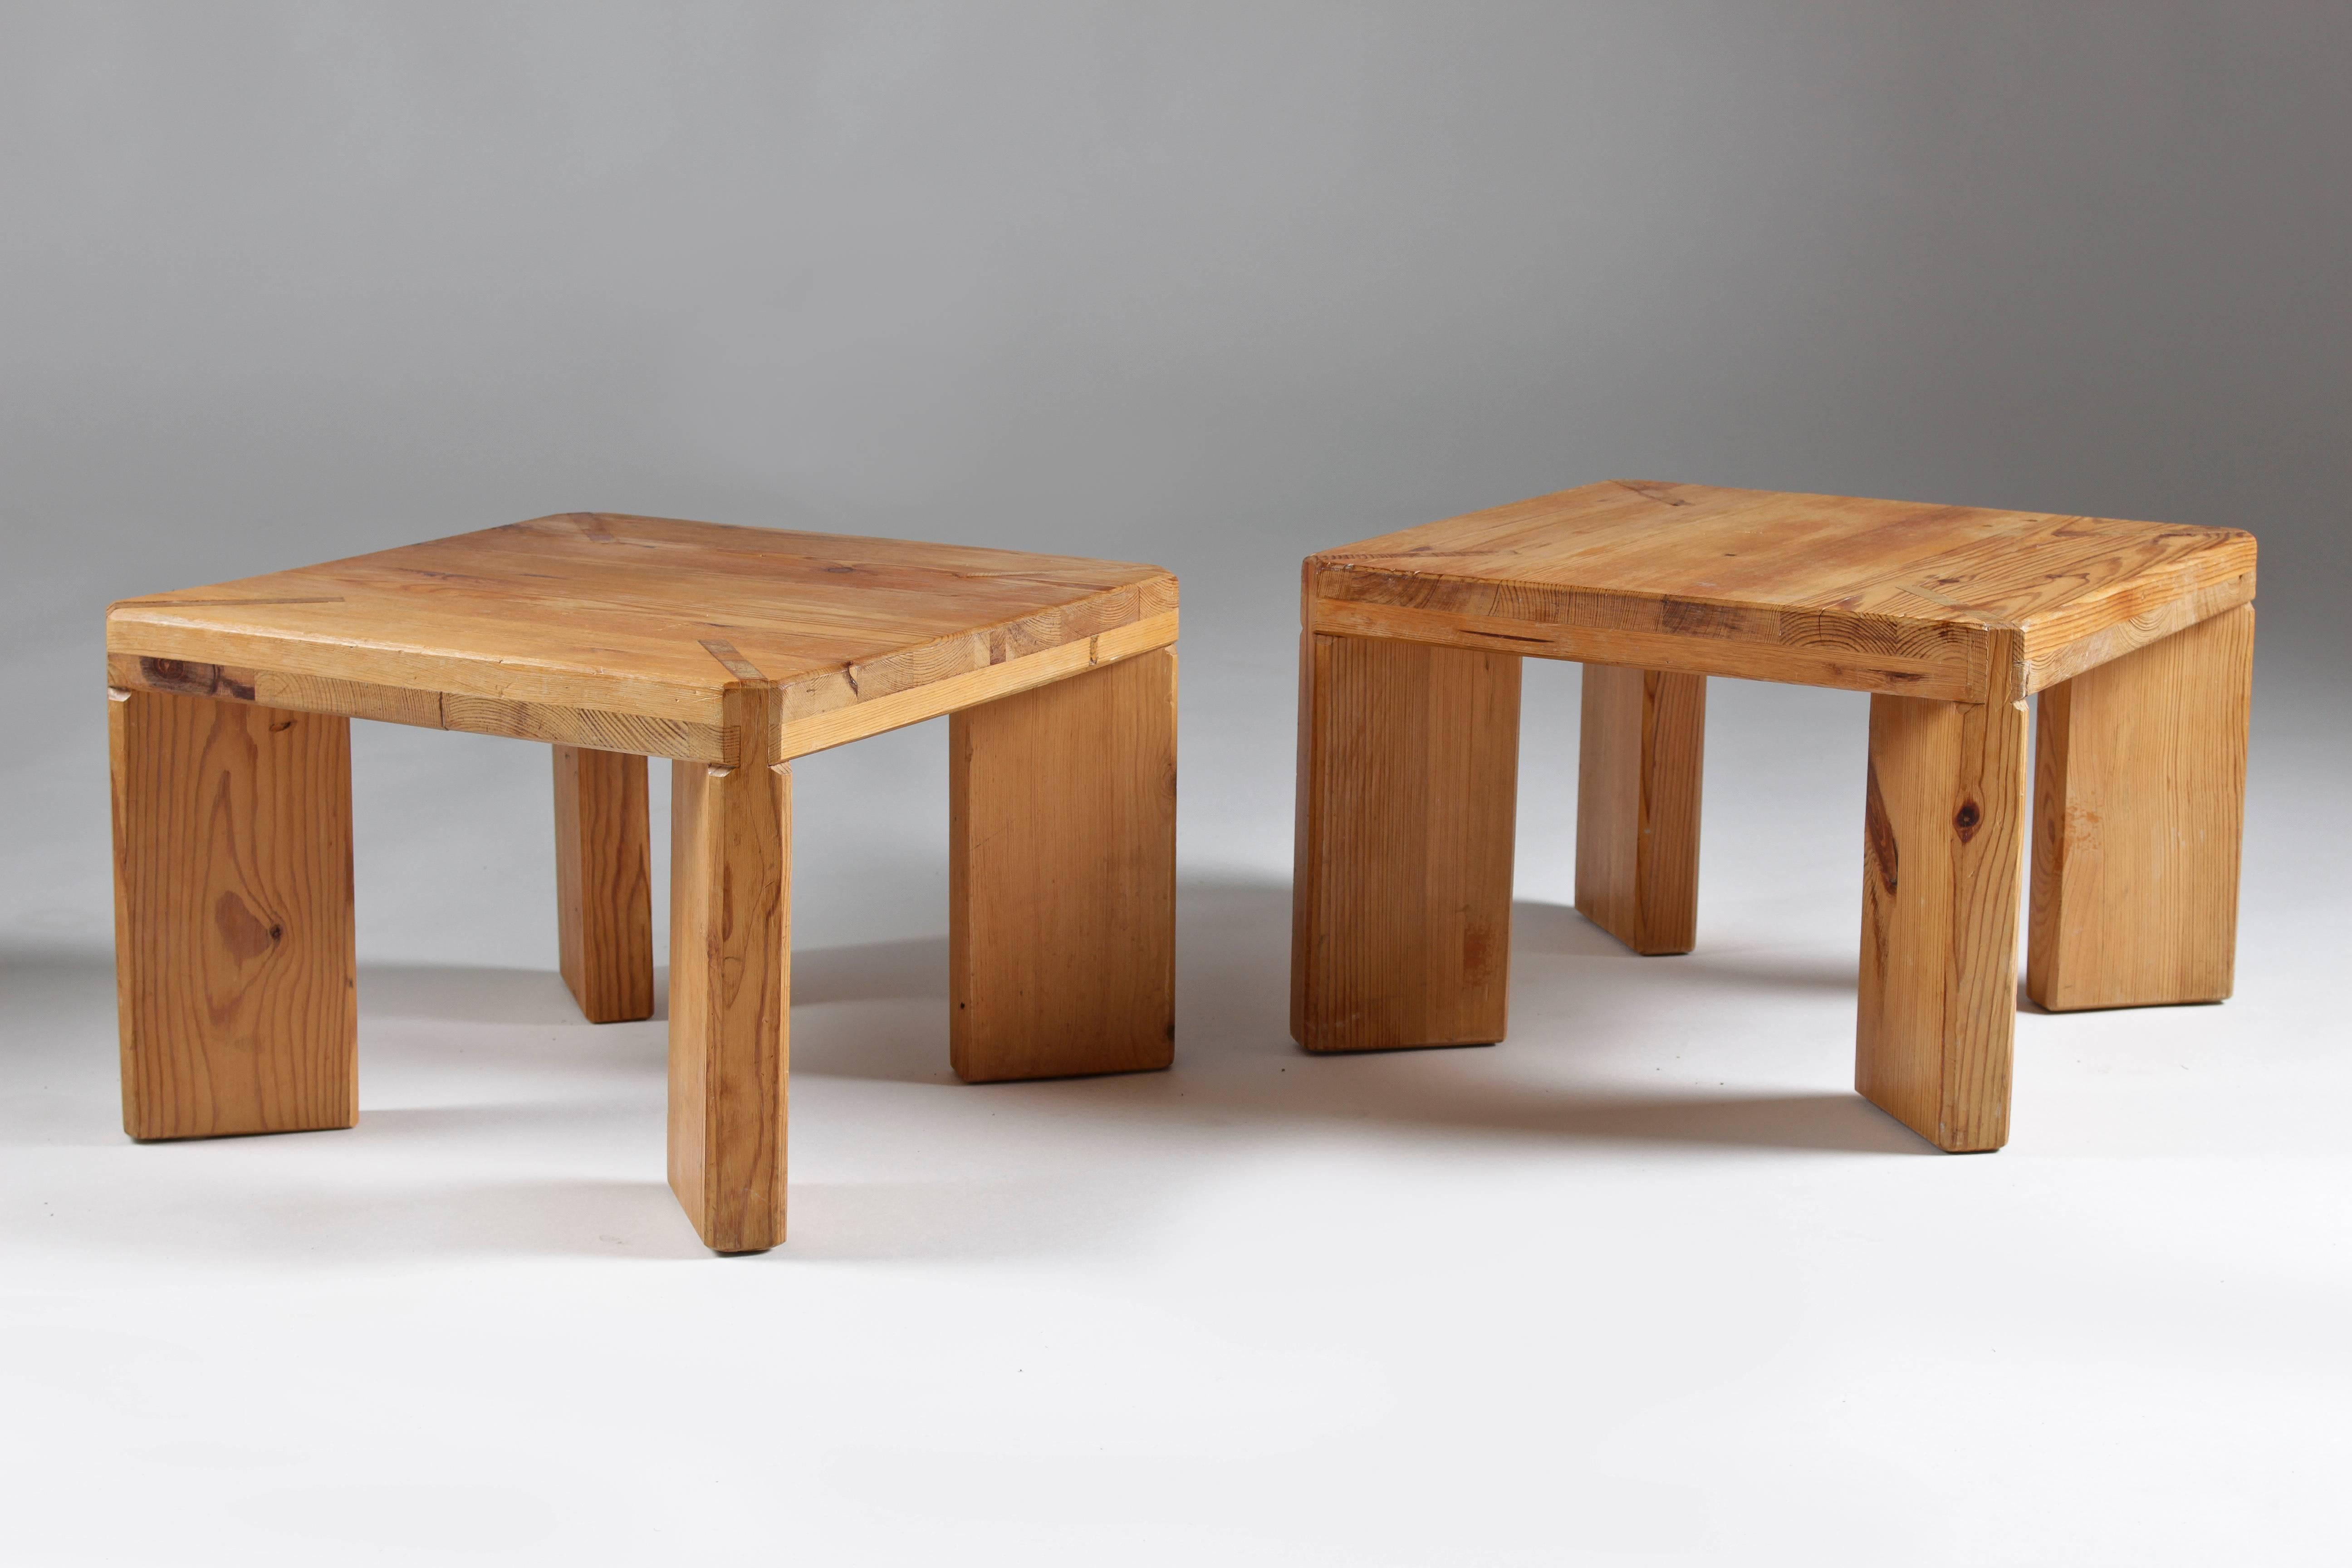 Small side tables in solid pine made by Roland Williamsson in 1969. Roland Williamsson made heavy and robust furniture, usually using old pinewood. With a great feeling for details and quality, his pieces are among the best of the era. His furniture